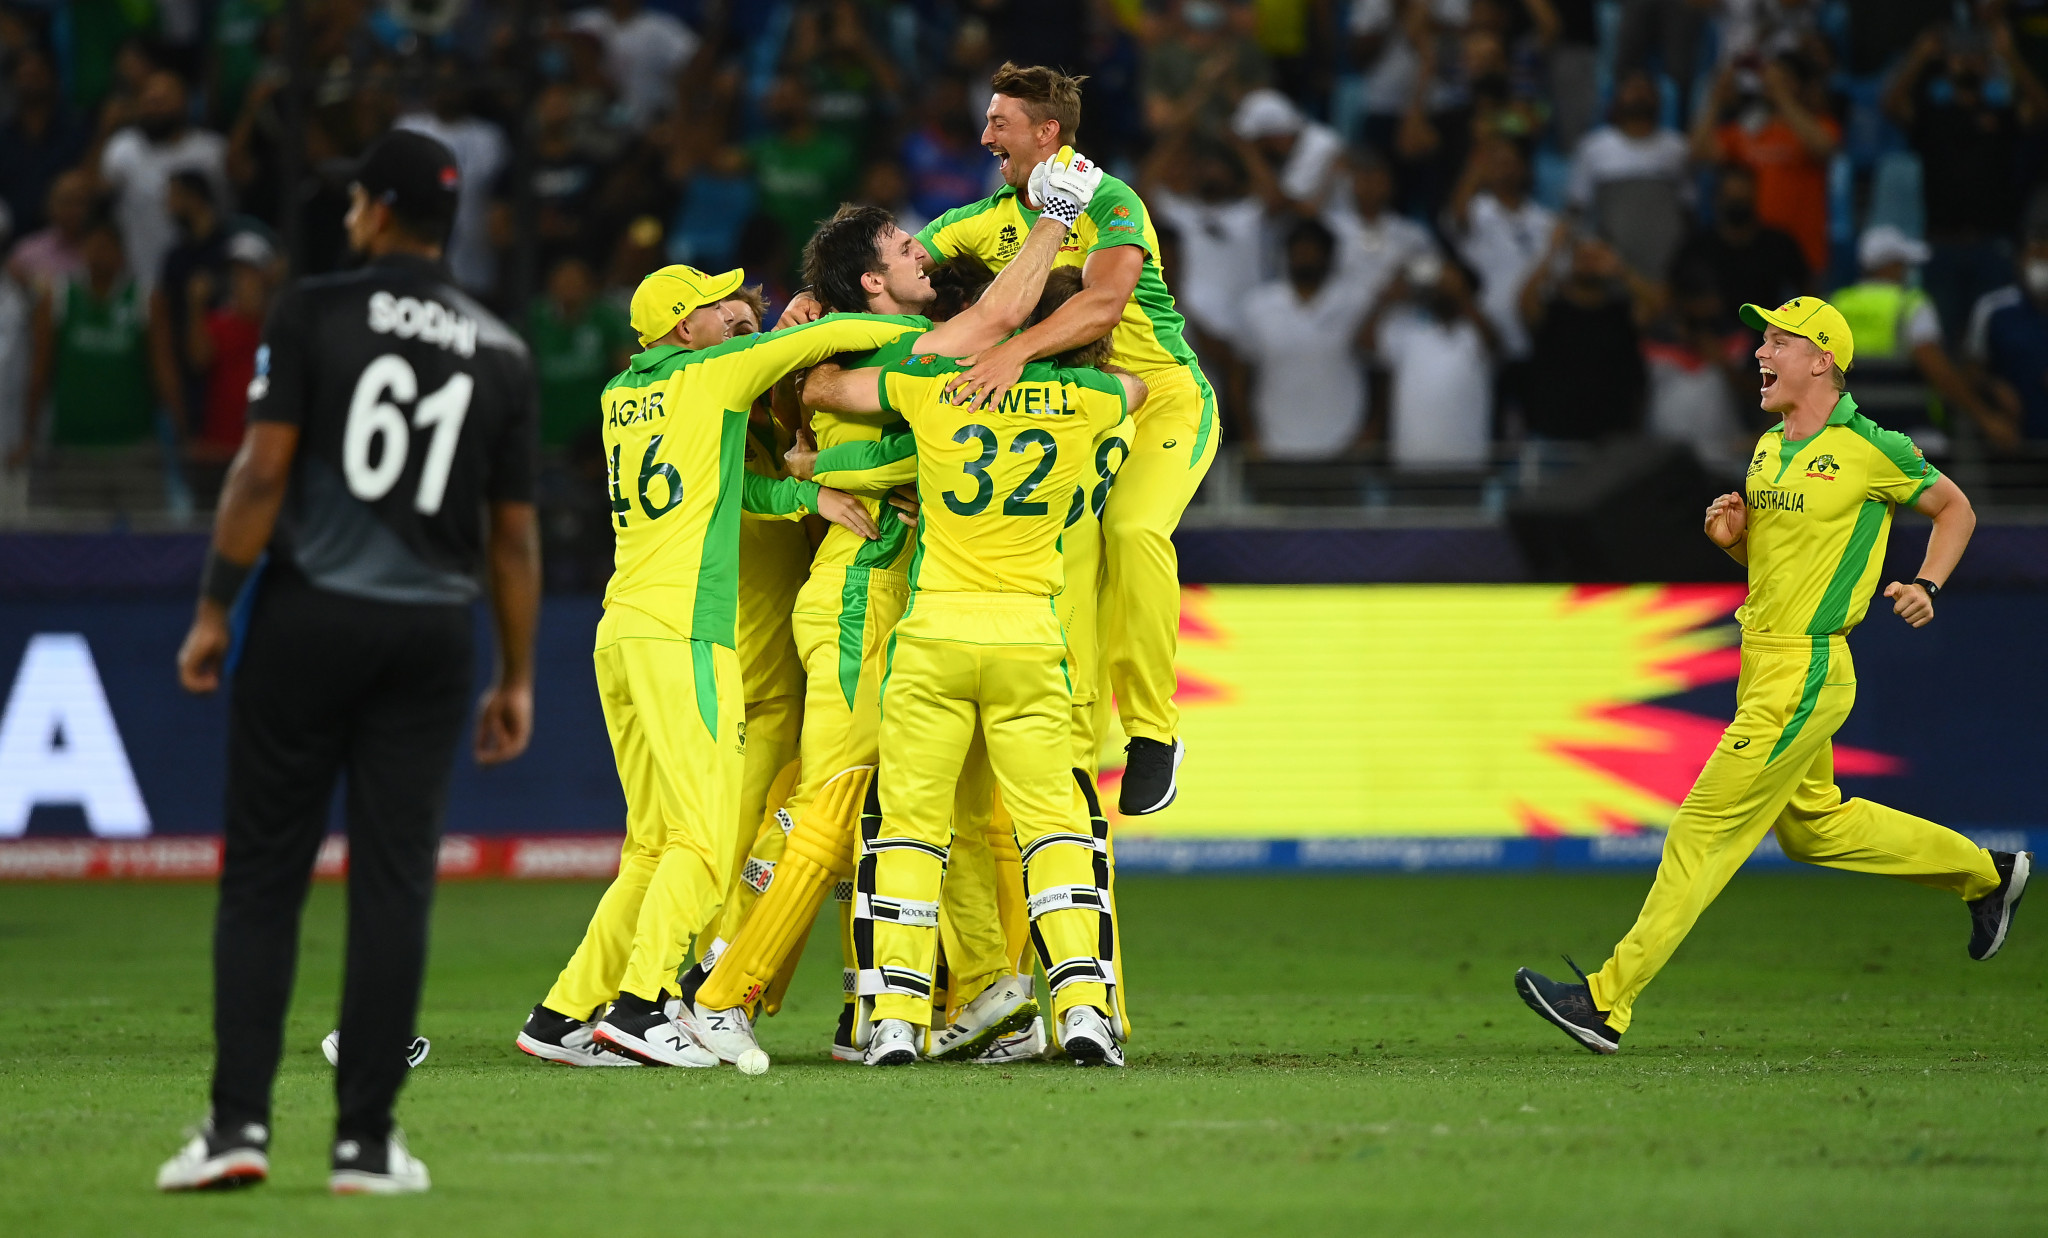 Australia claim first Men's T20 World Cup title with victory over New Zealand